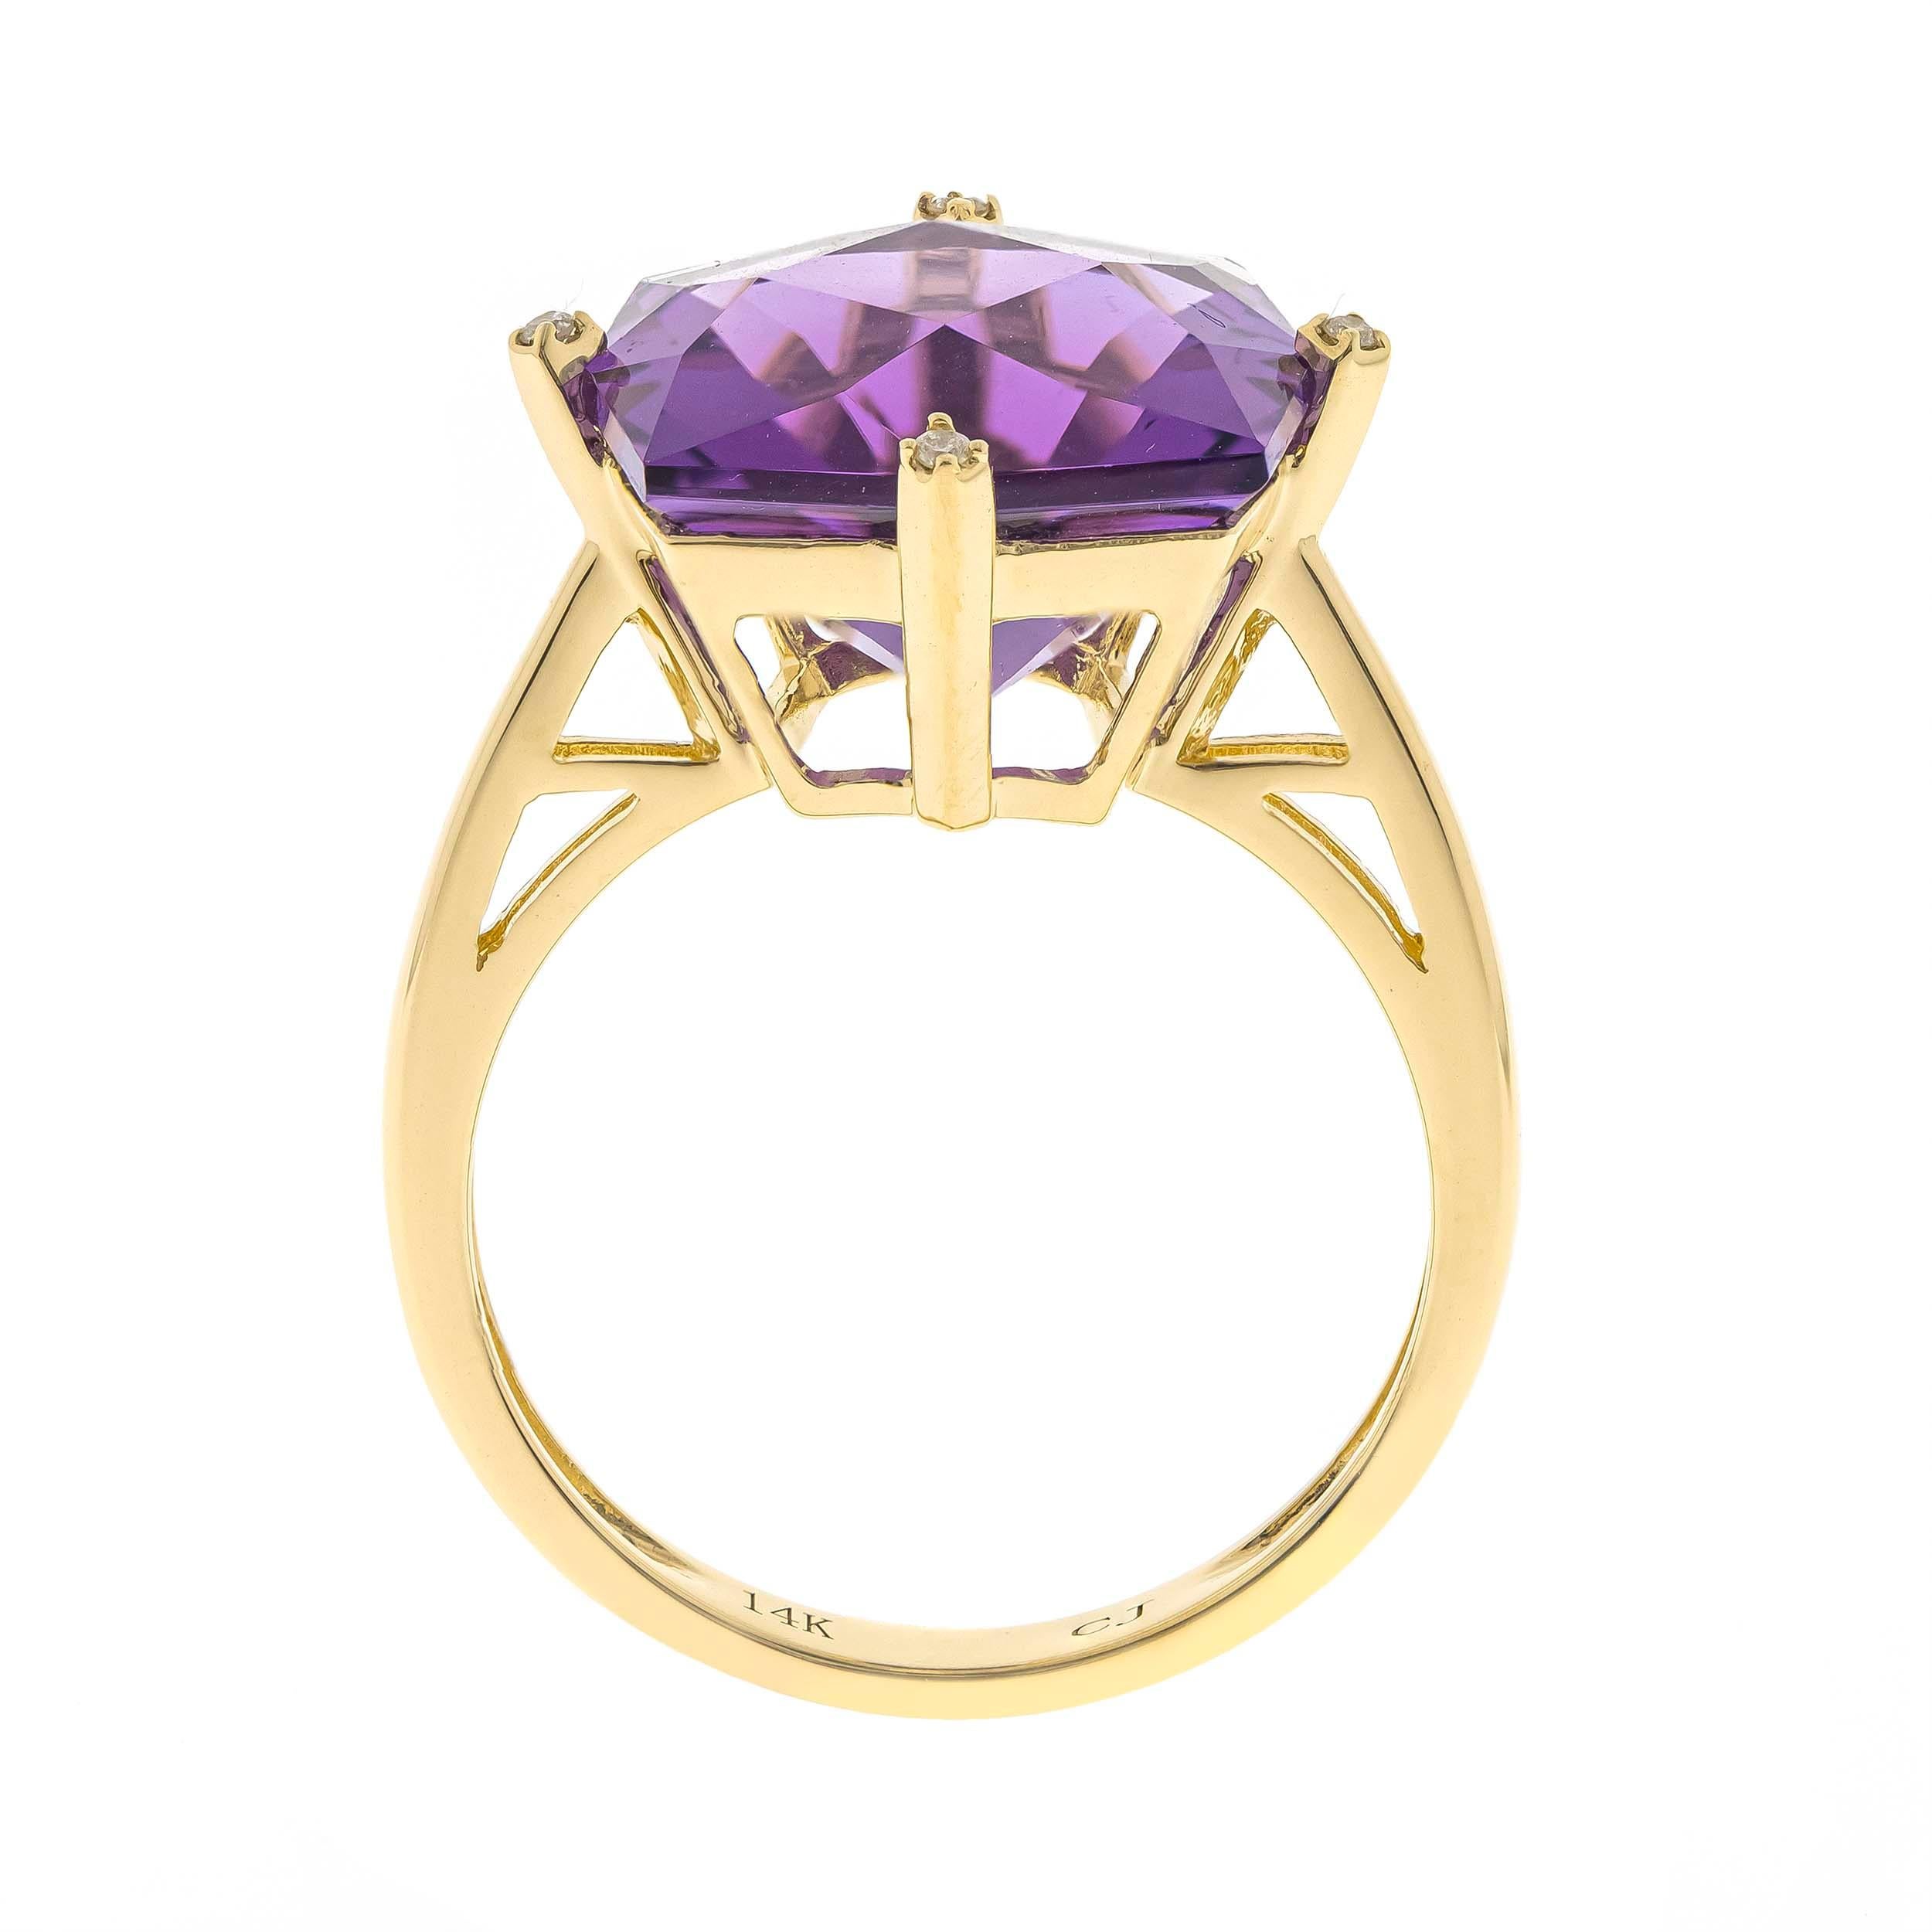 14k yellow gold amethyst ring with diamond accents